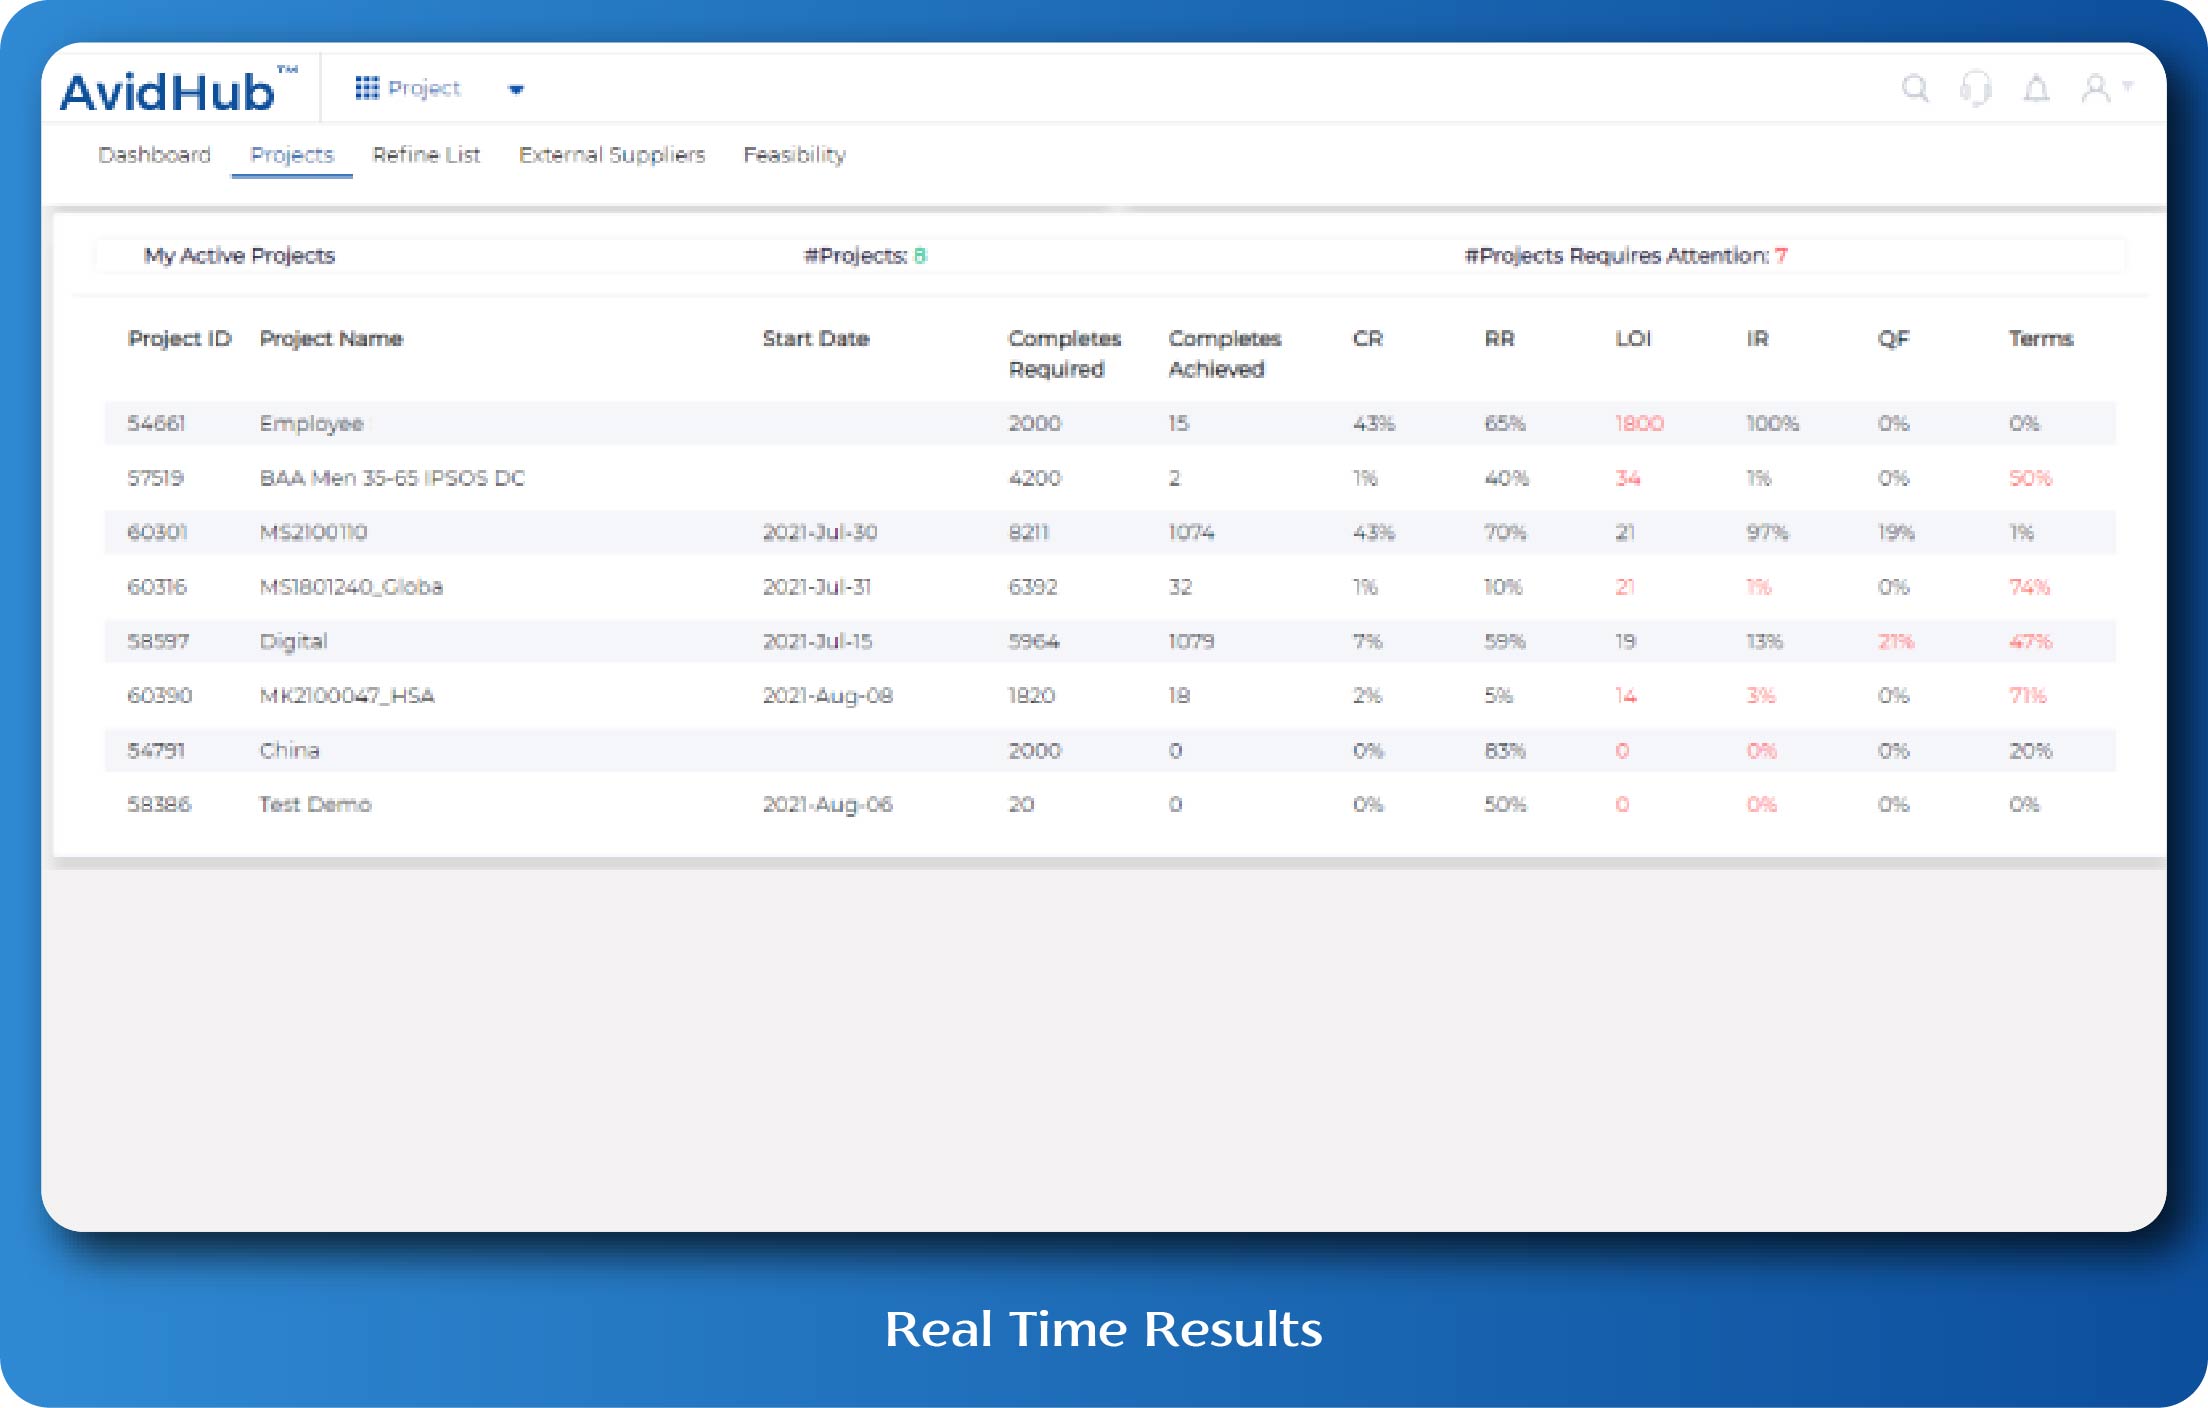 Get real time results for all your projects